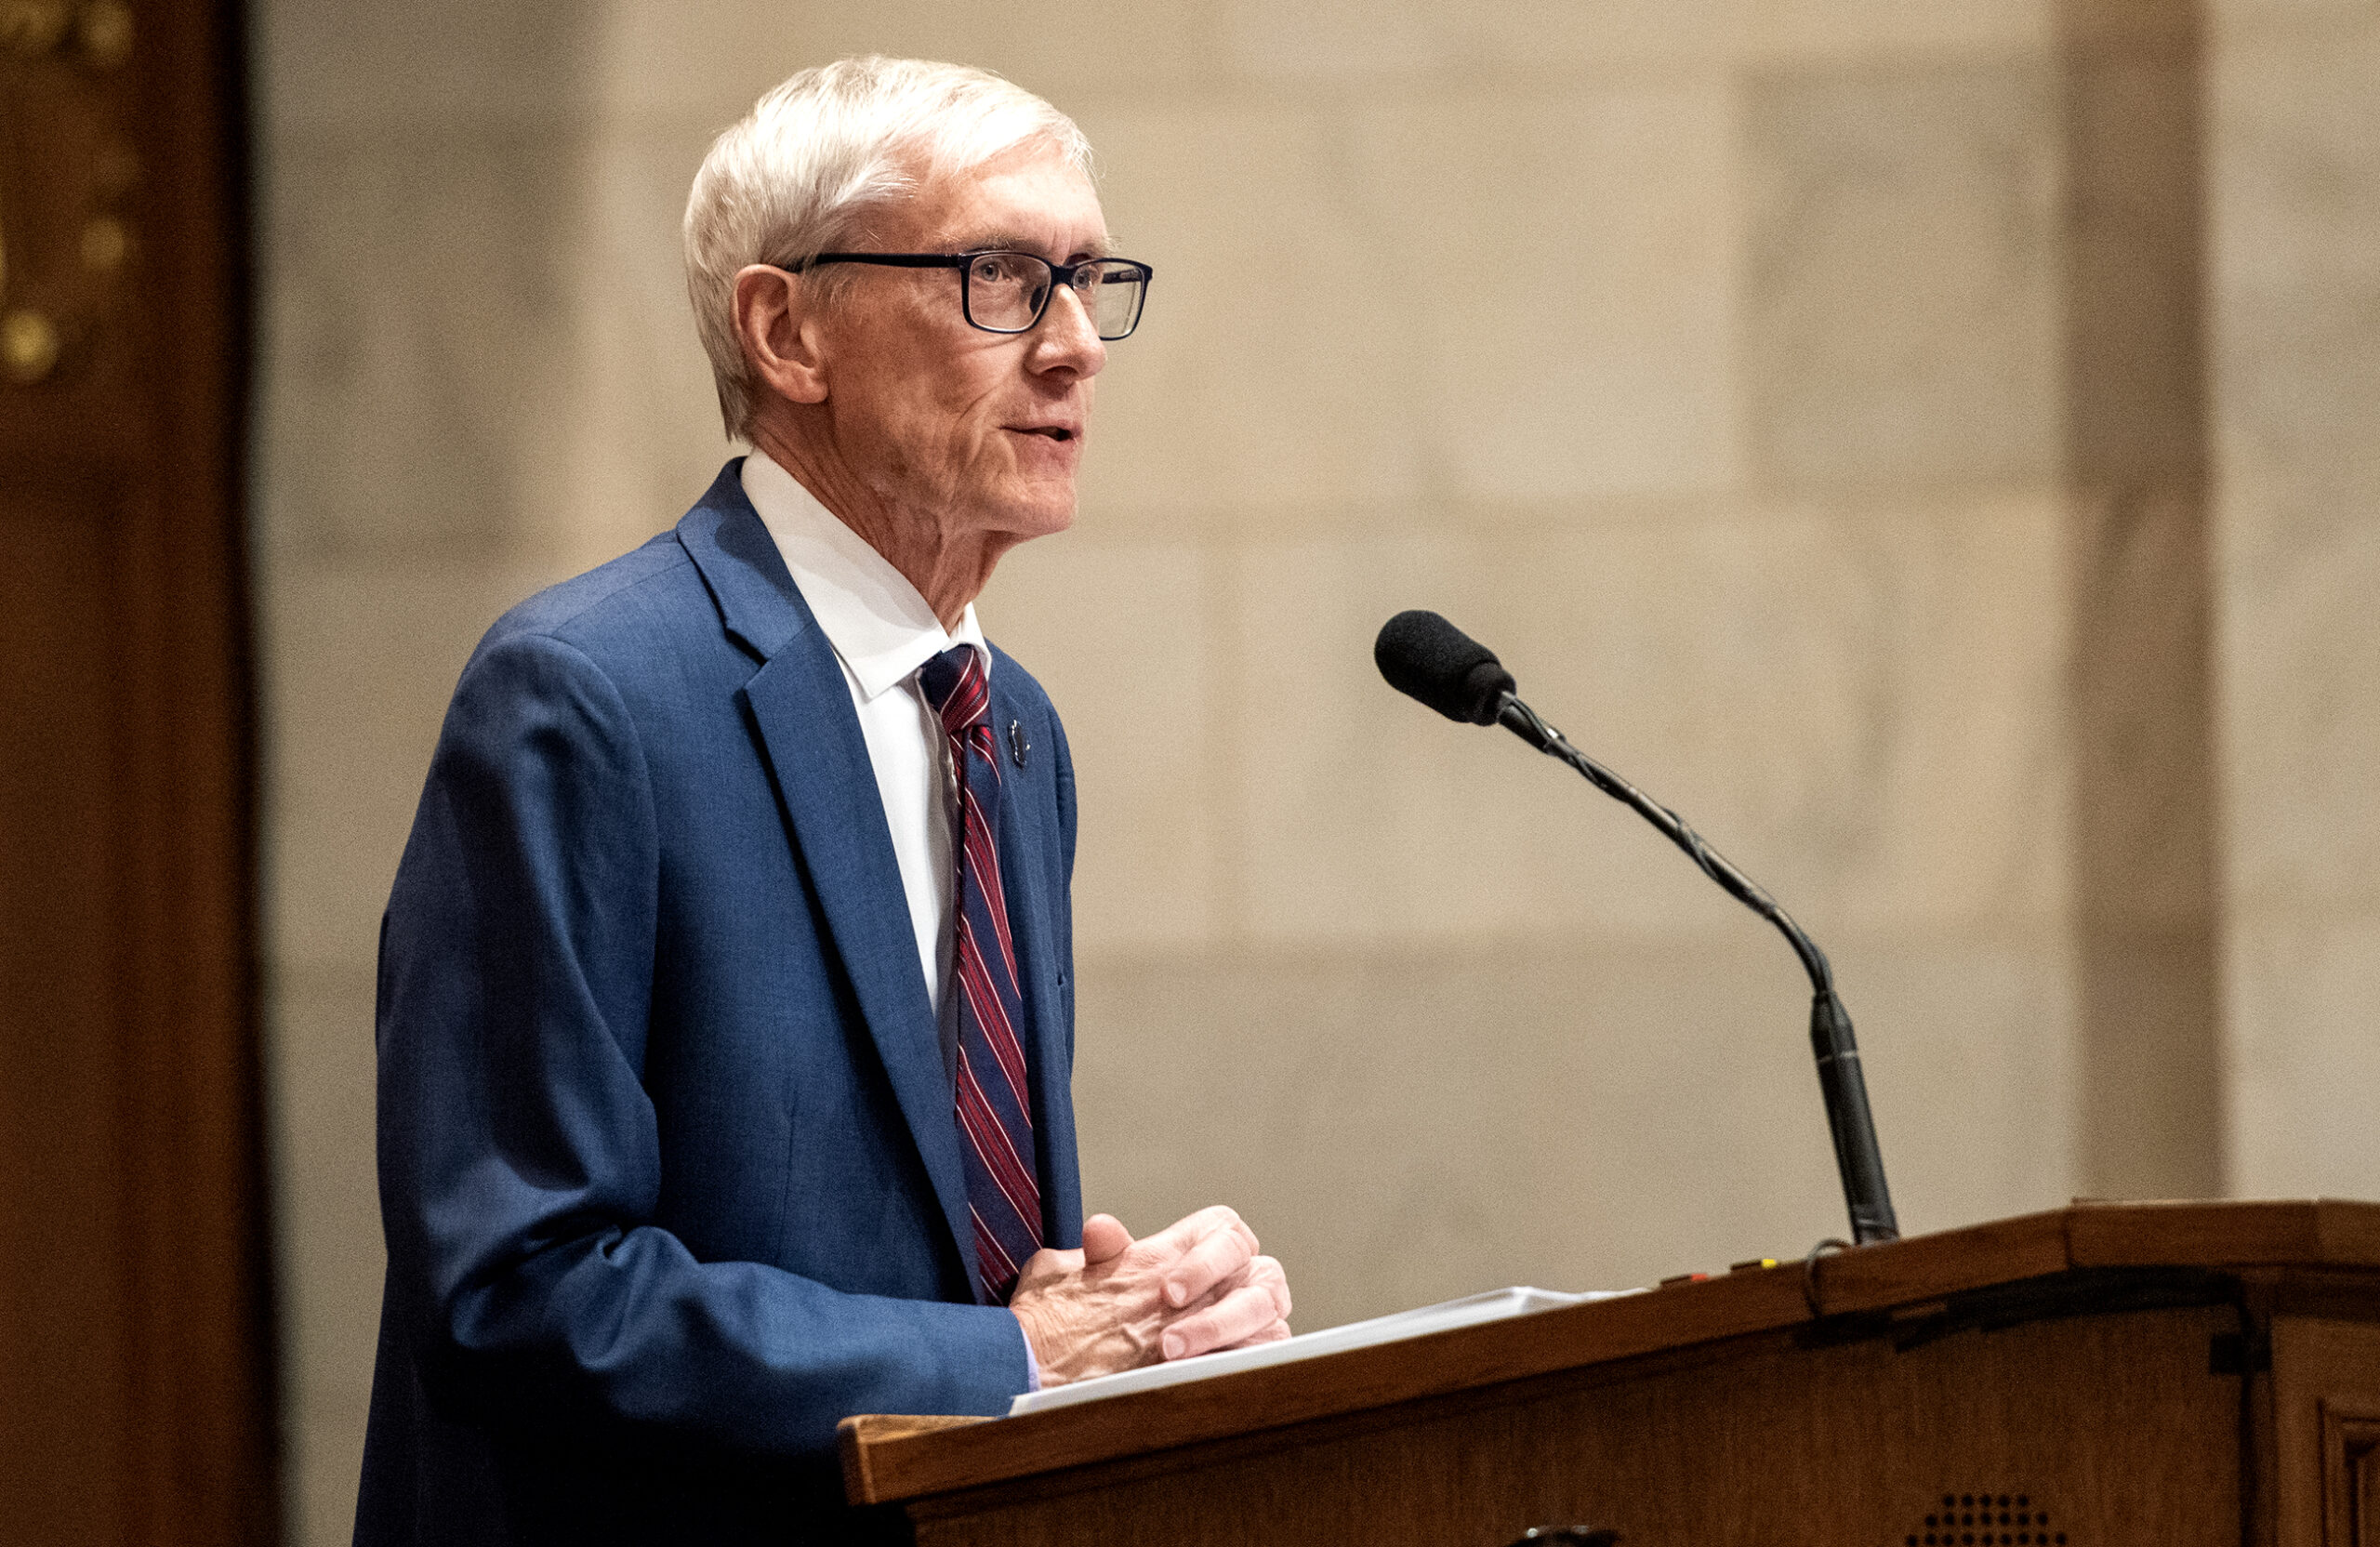 Gov. Evers looks forward as he delivers an address from the podium.